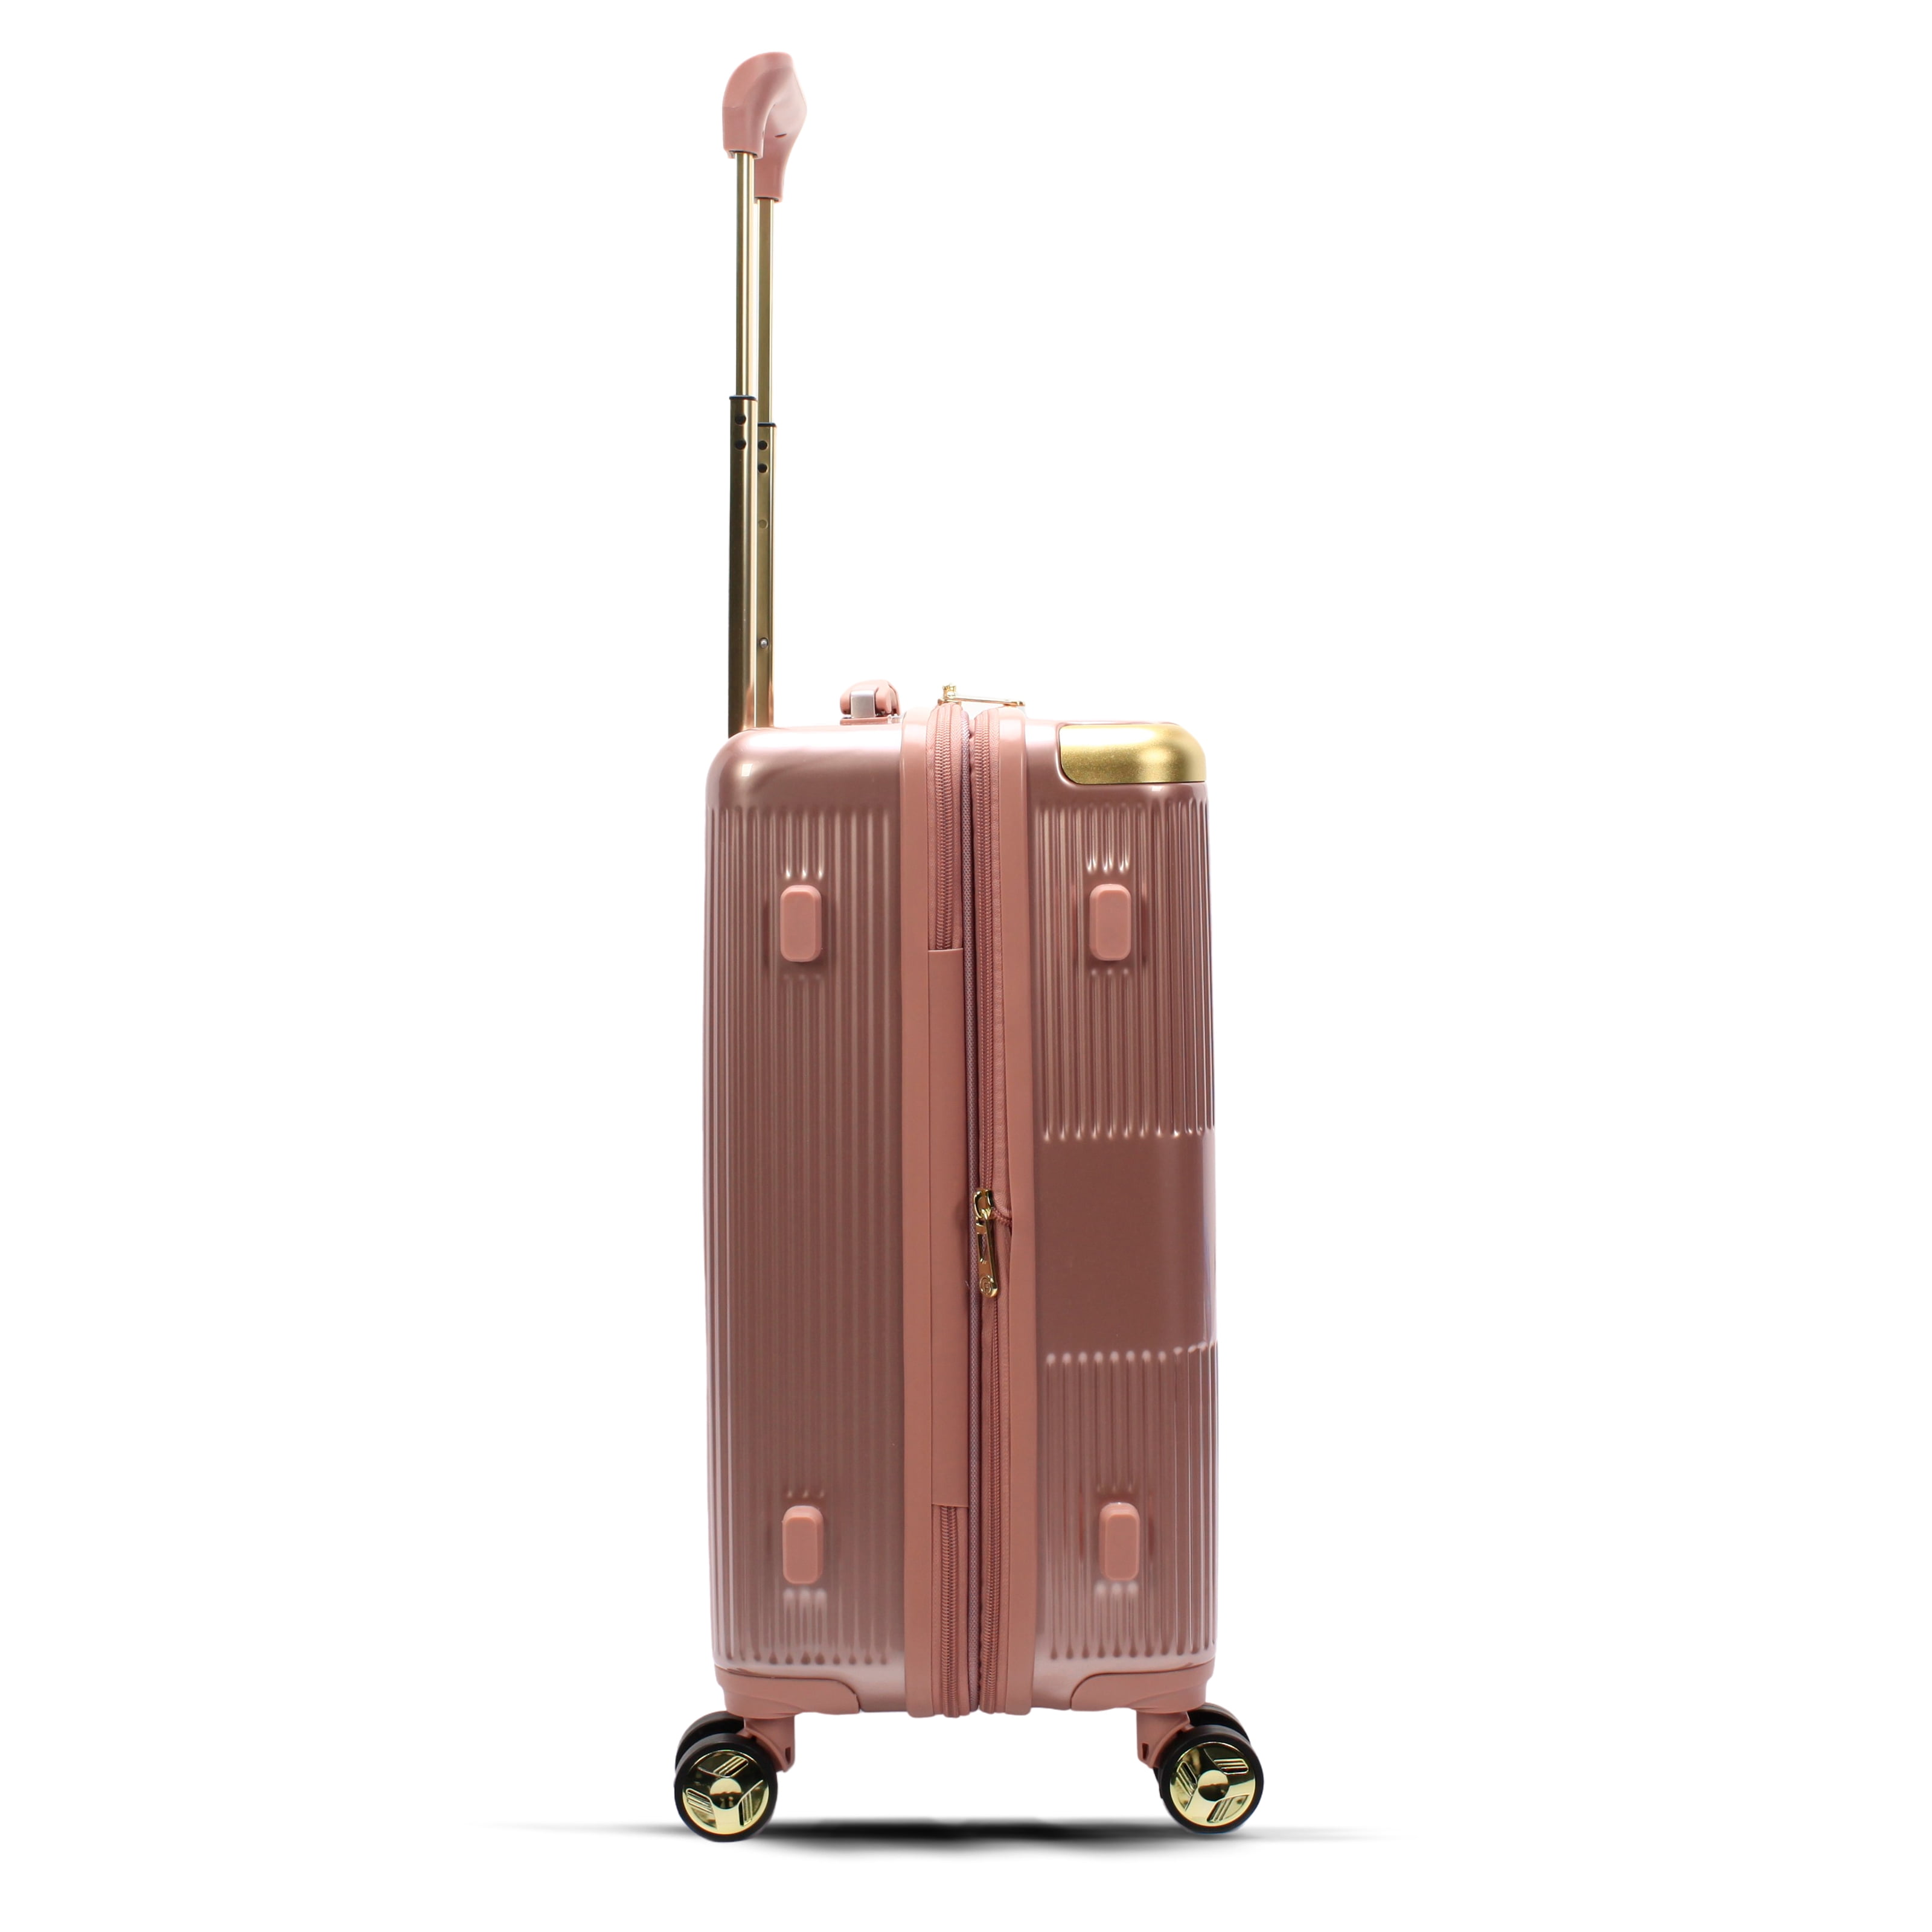 Protege 22 Carry-on Luggage Set with Luggage Tags, Blush Pink 